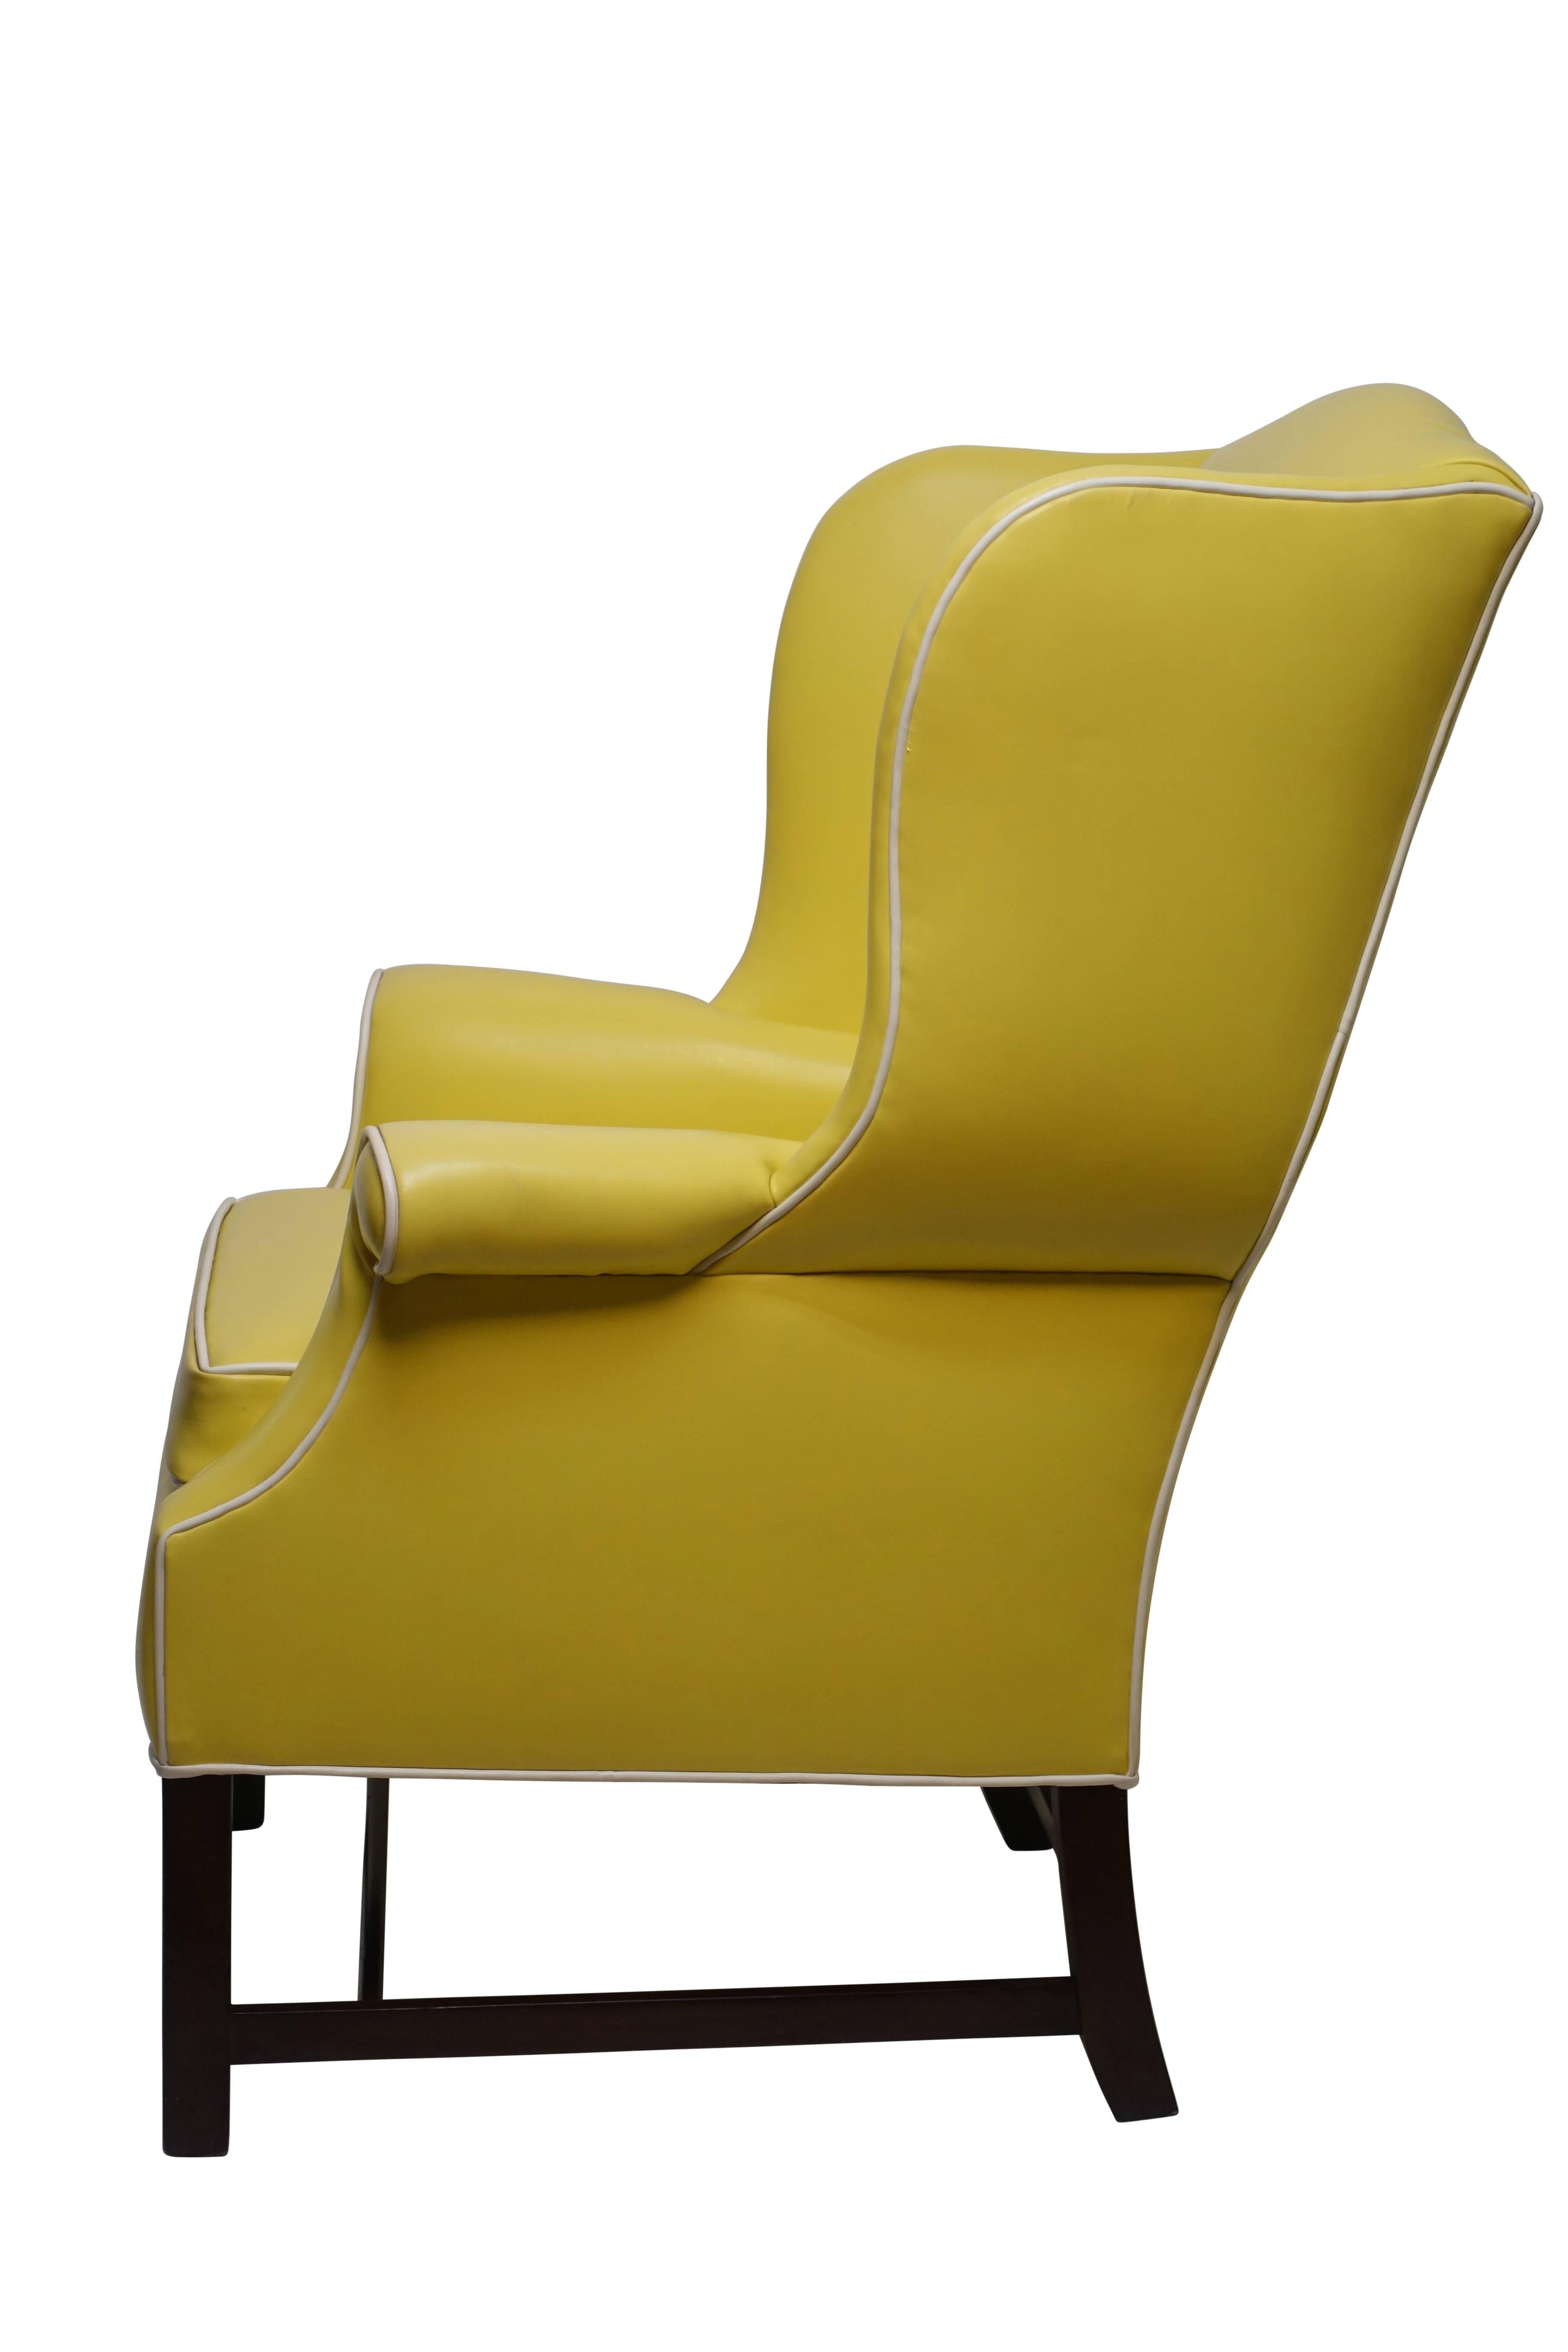 American Pair of Georgian Style Yellow Vinyl Wingback Chairs with Piping Detail, 1960s